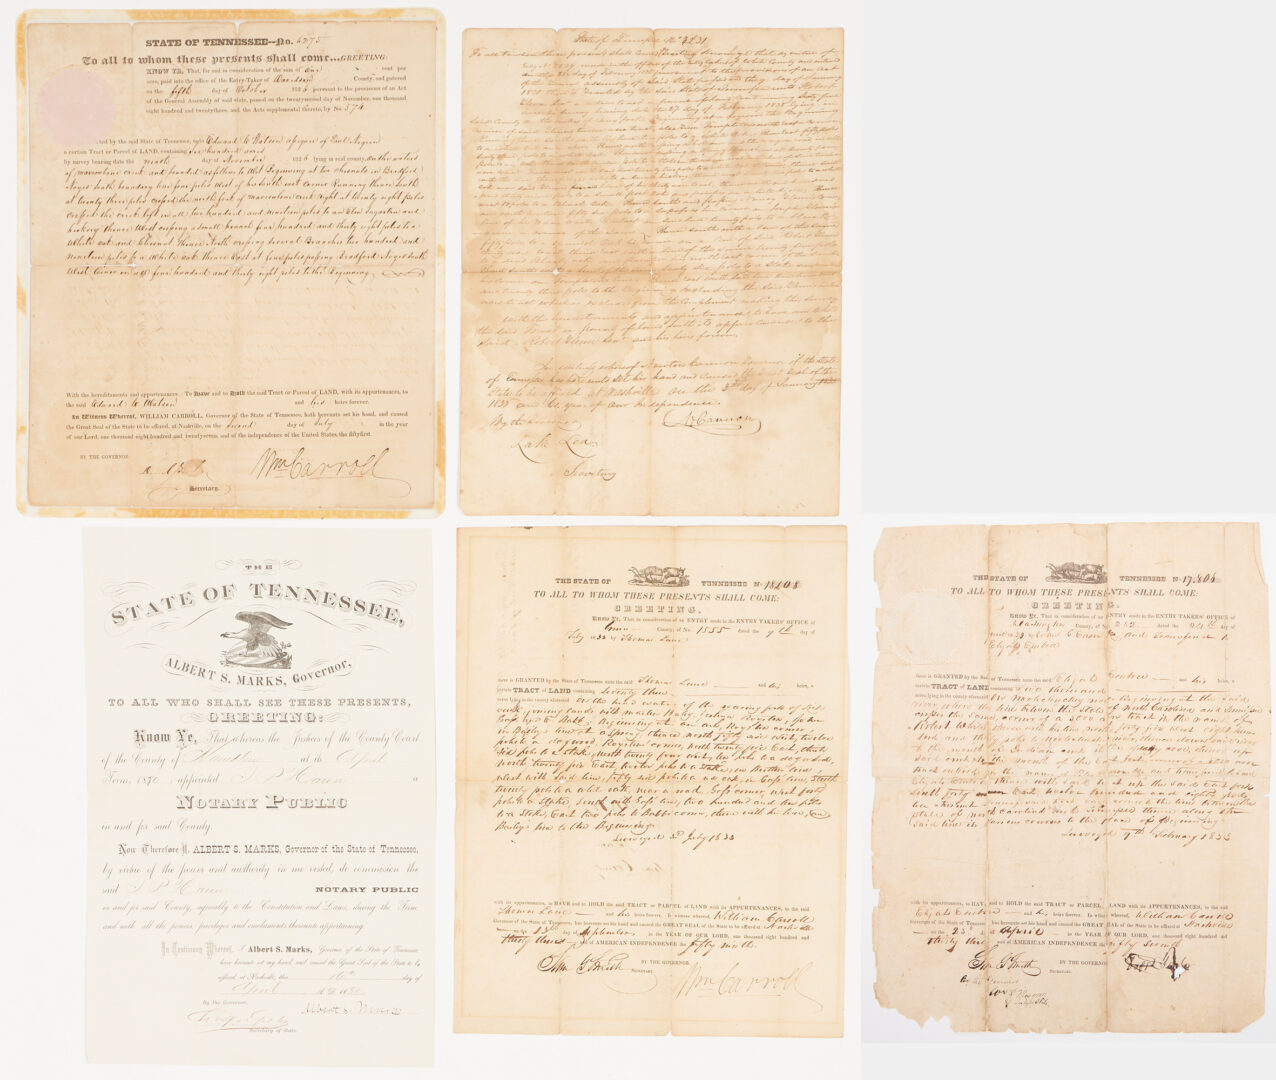 Lot 603: Grouping of 4 Tennessee Land Grants & Notary Public Appointment